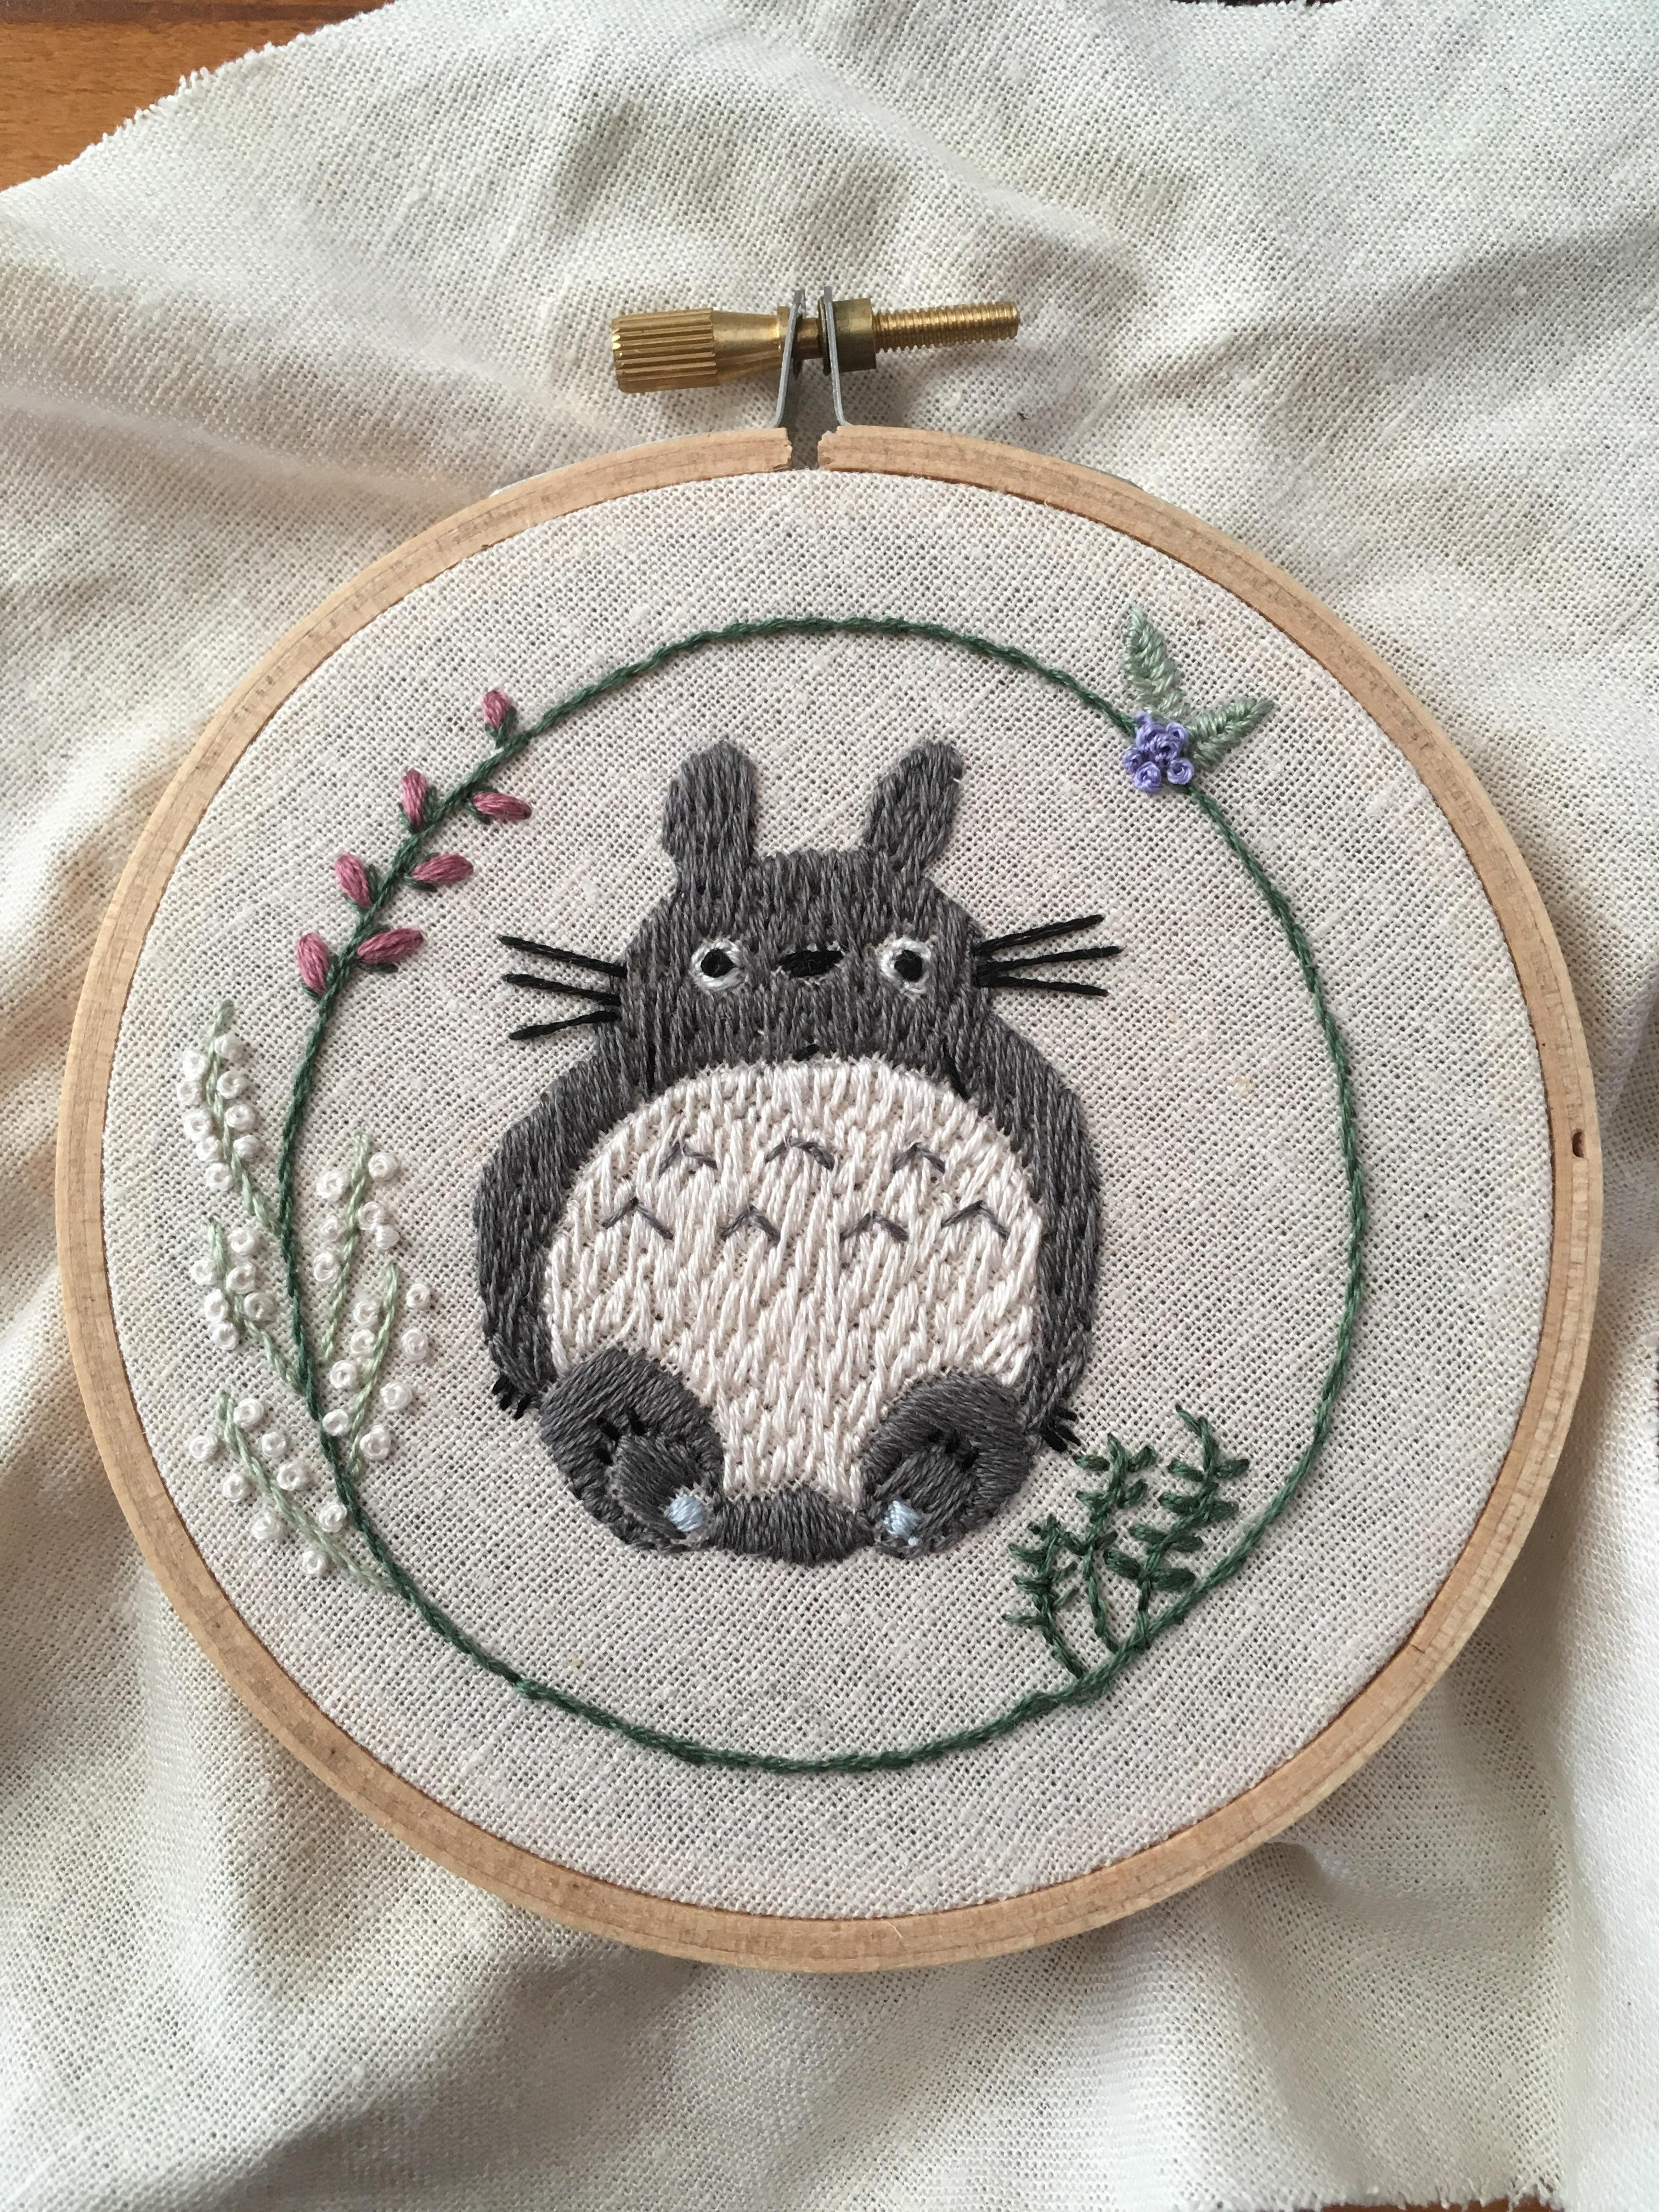 Totoro Embroidery Pattern Totoro Need To Add Some More Floral Elements But Happy With It So